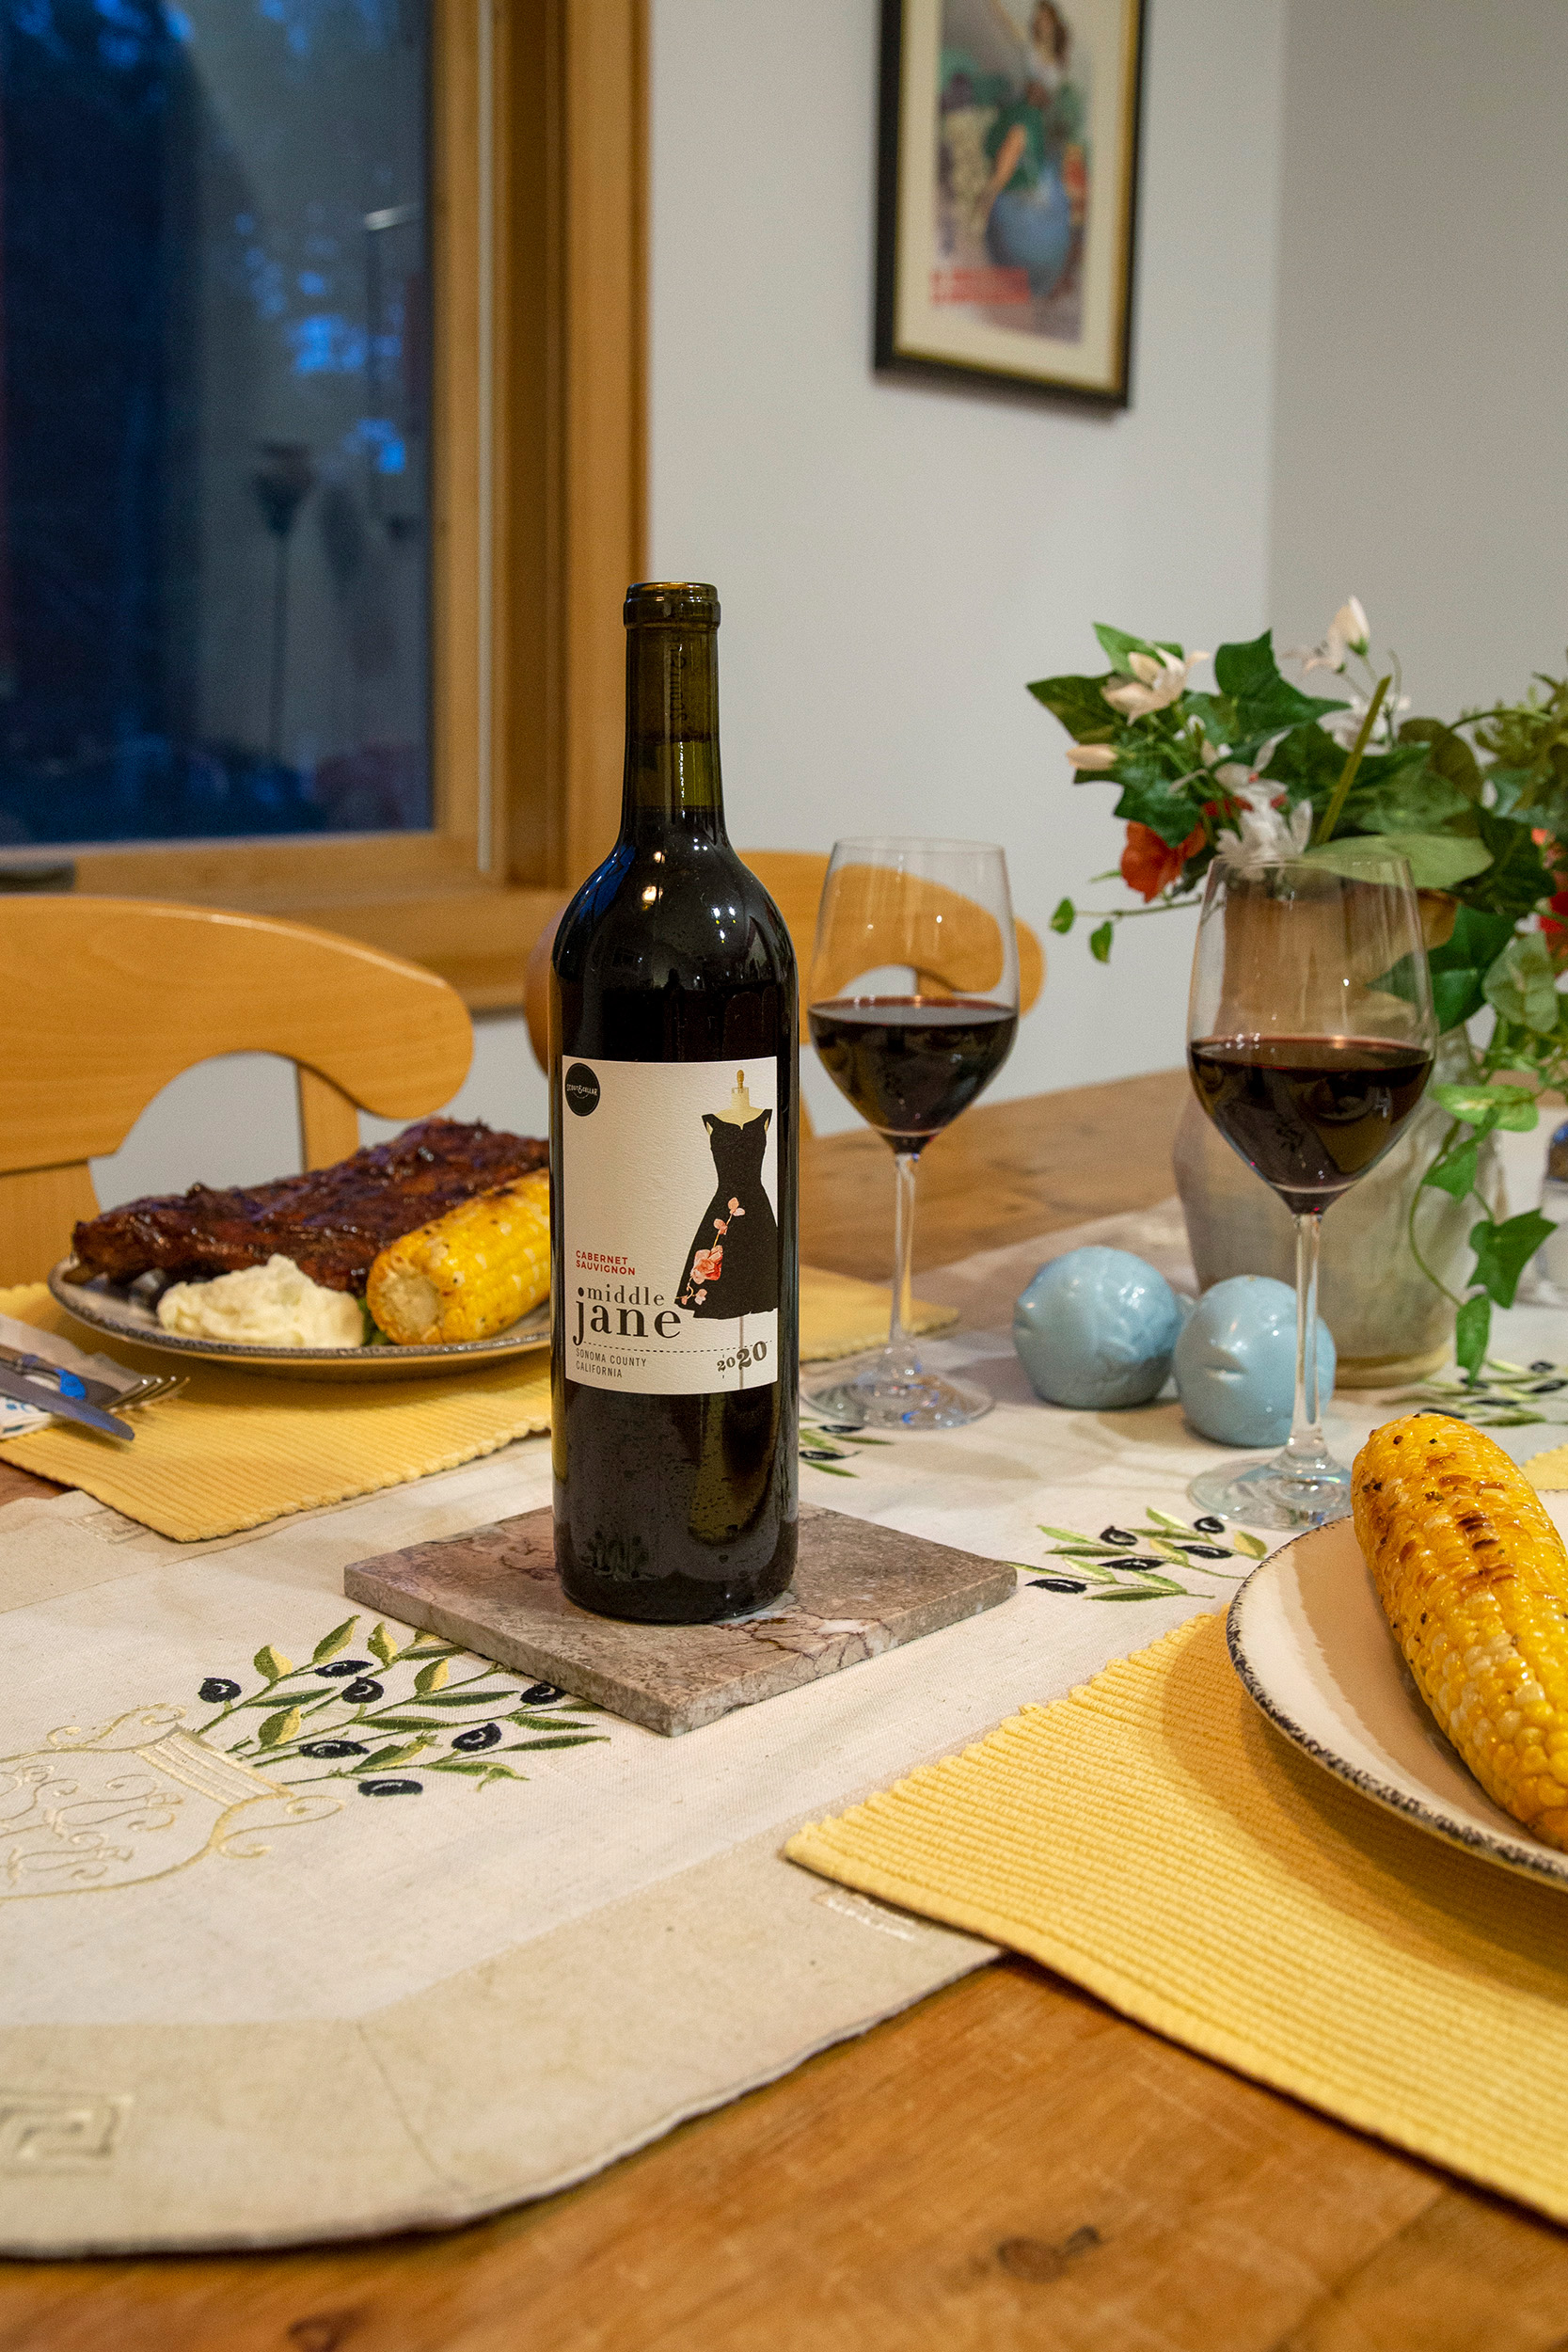 A bottle of red wine sits on a dining room table with dinner plates and two wine glasses